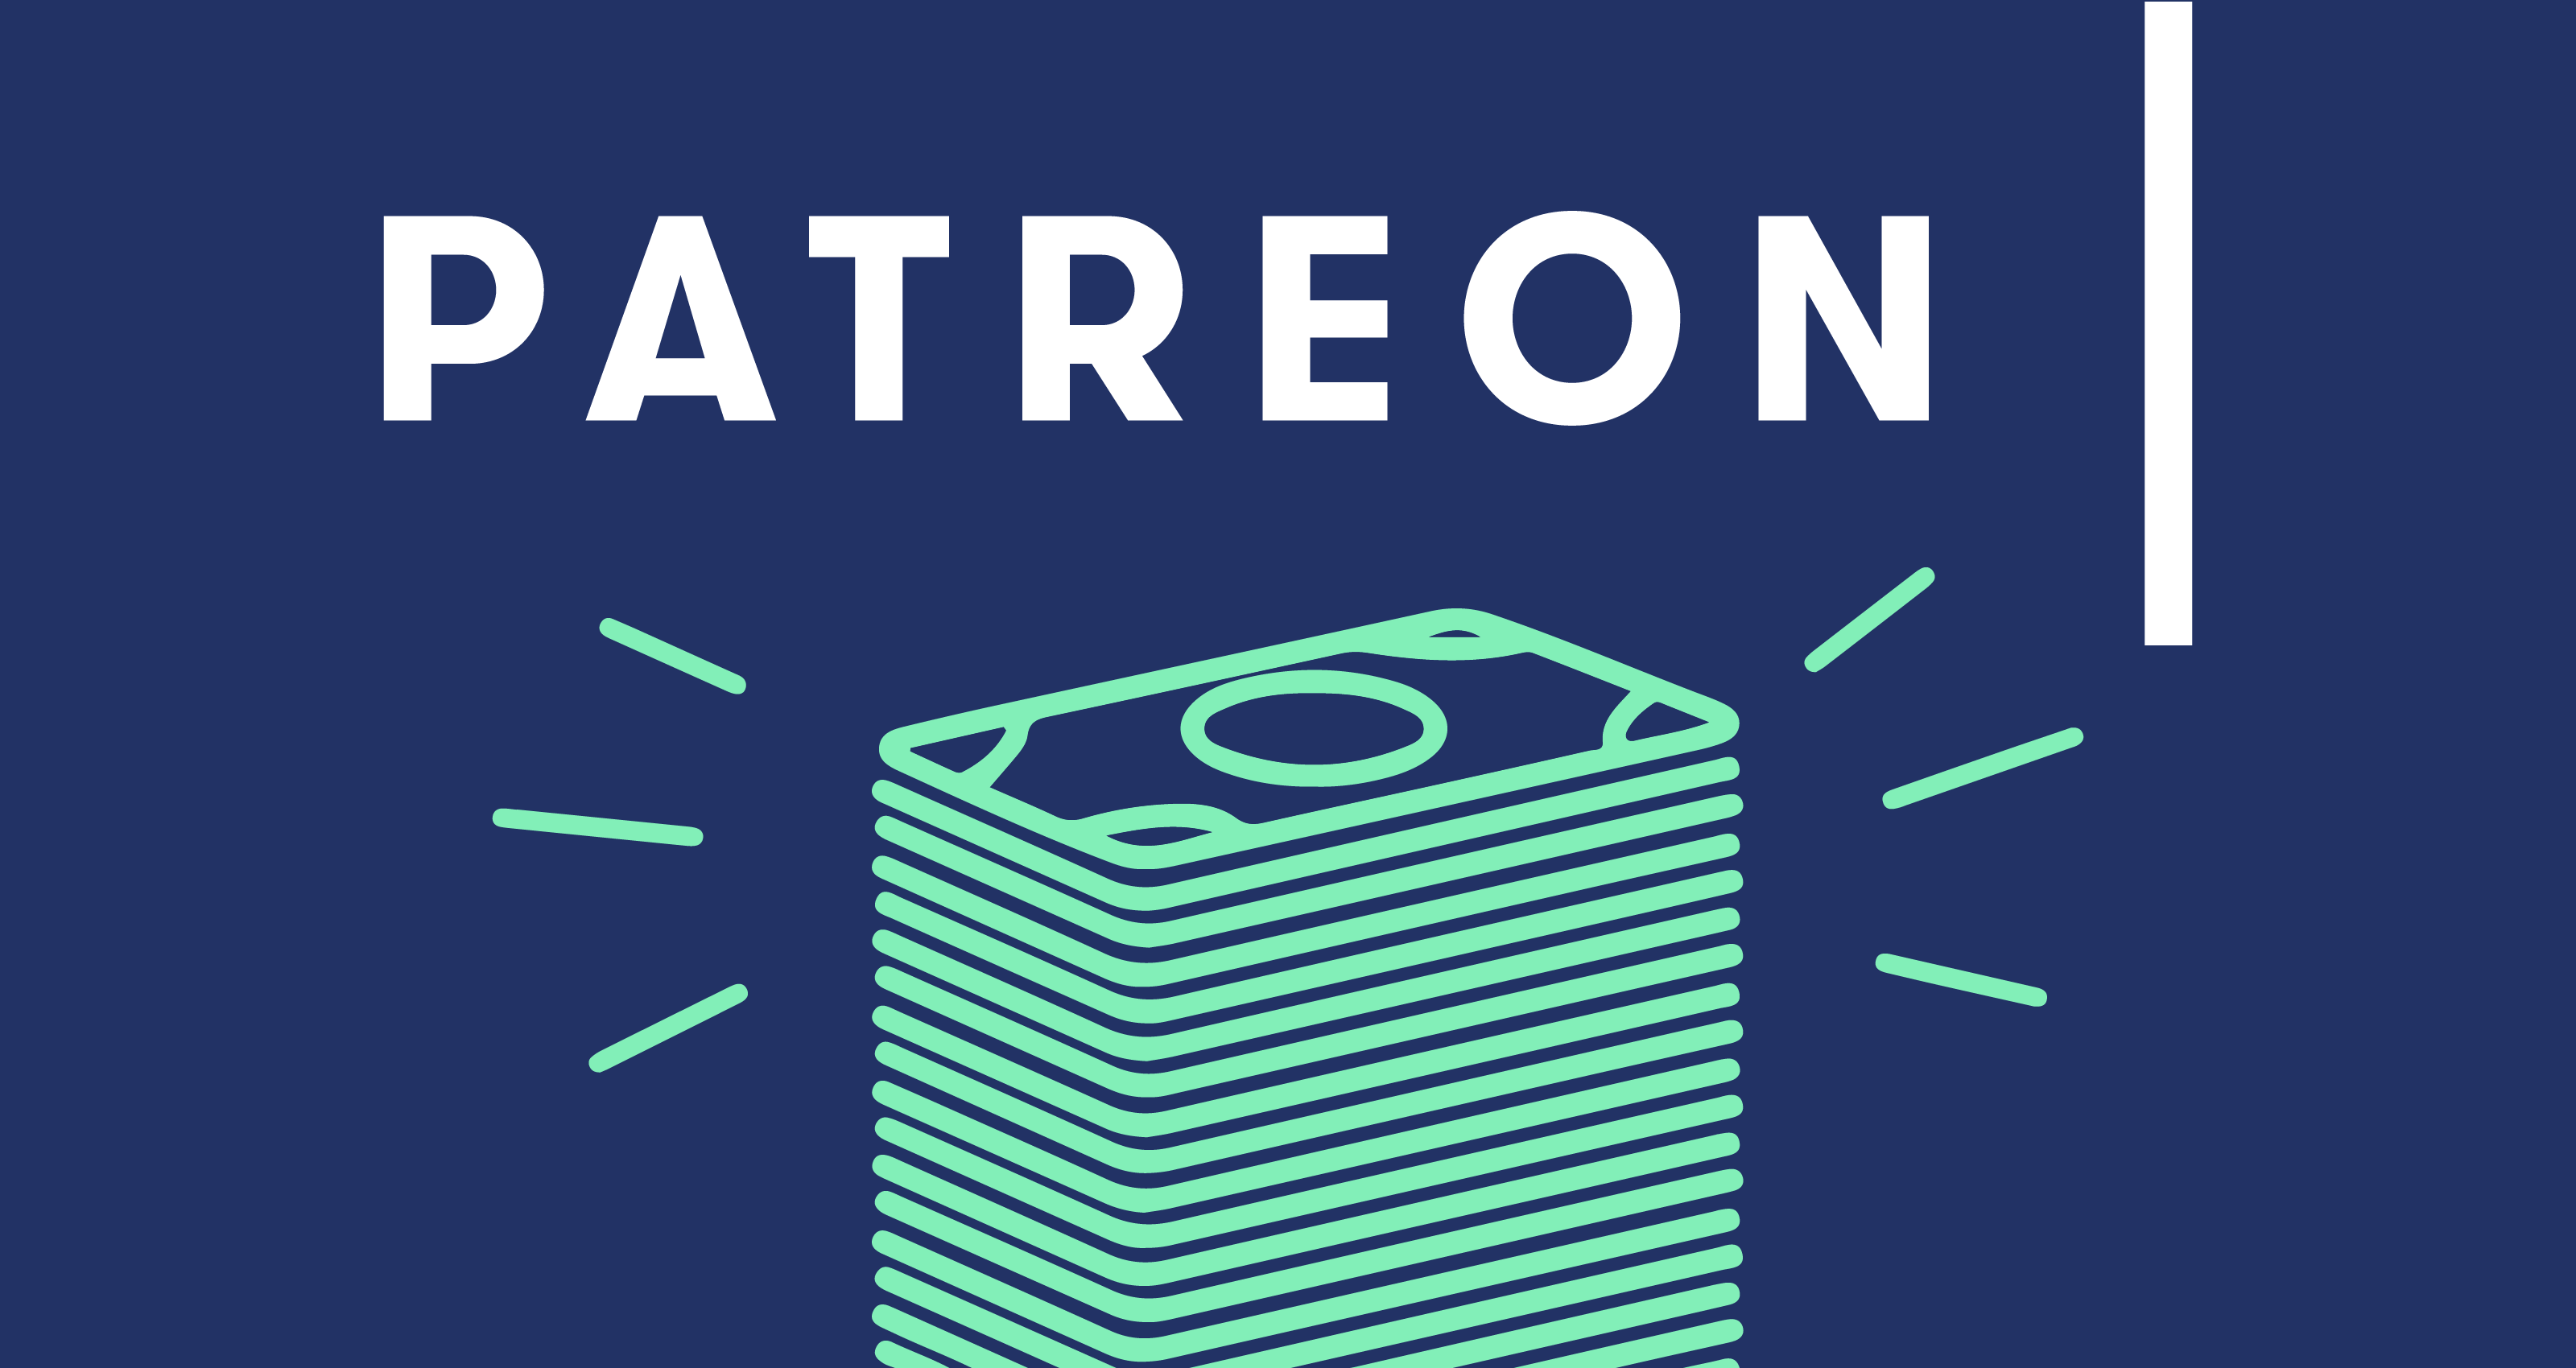 Patreon lays off 13 percent of its staff despite pandemic-induced growth